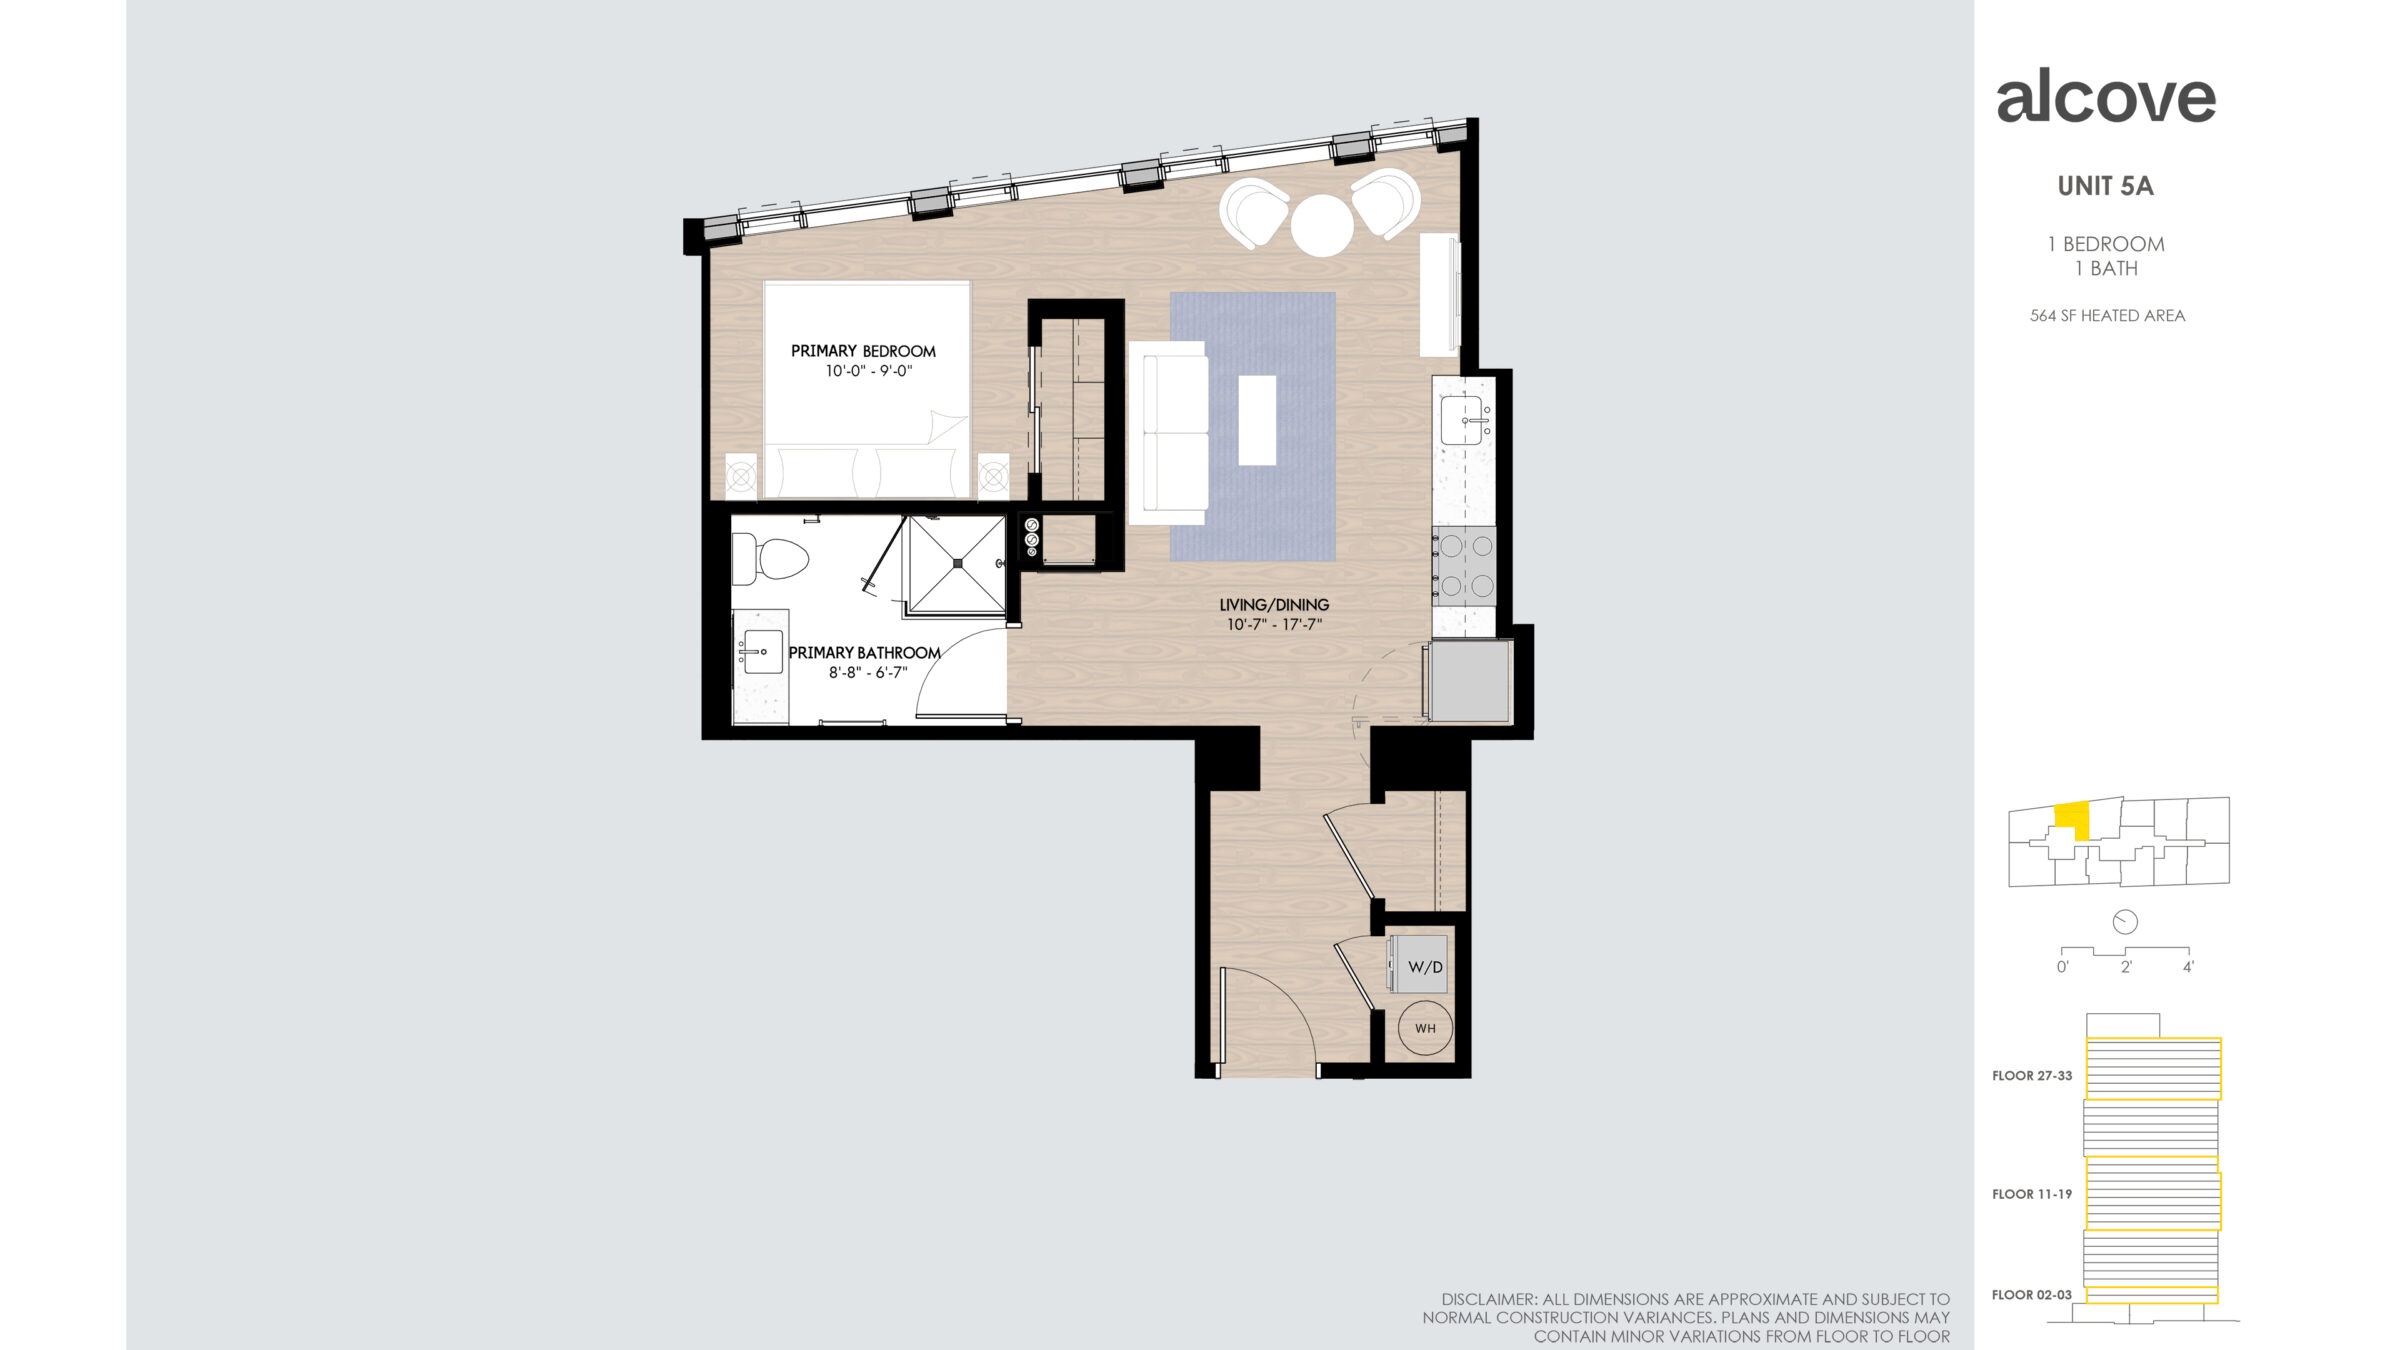 Image reads: UNIT 5A 1 BEDROOM 1 BATH 564 SF HEATED AREA Floor 27-33 Floor 11-19 Floor 02-03 Disclaimer: all dimensions are approximate and subject to normal construction variances. Plans and dimensions may contain minor variations from floor to floor.